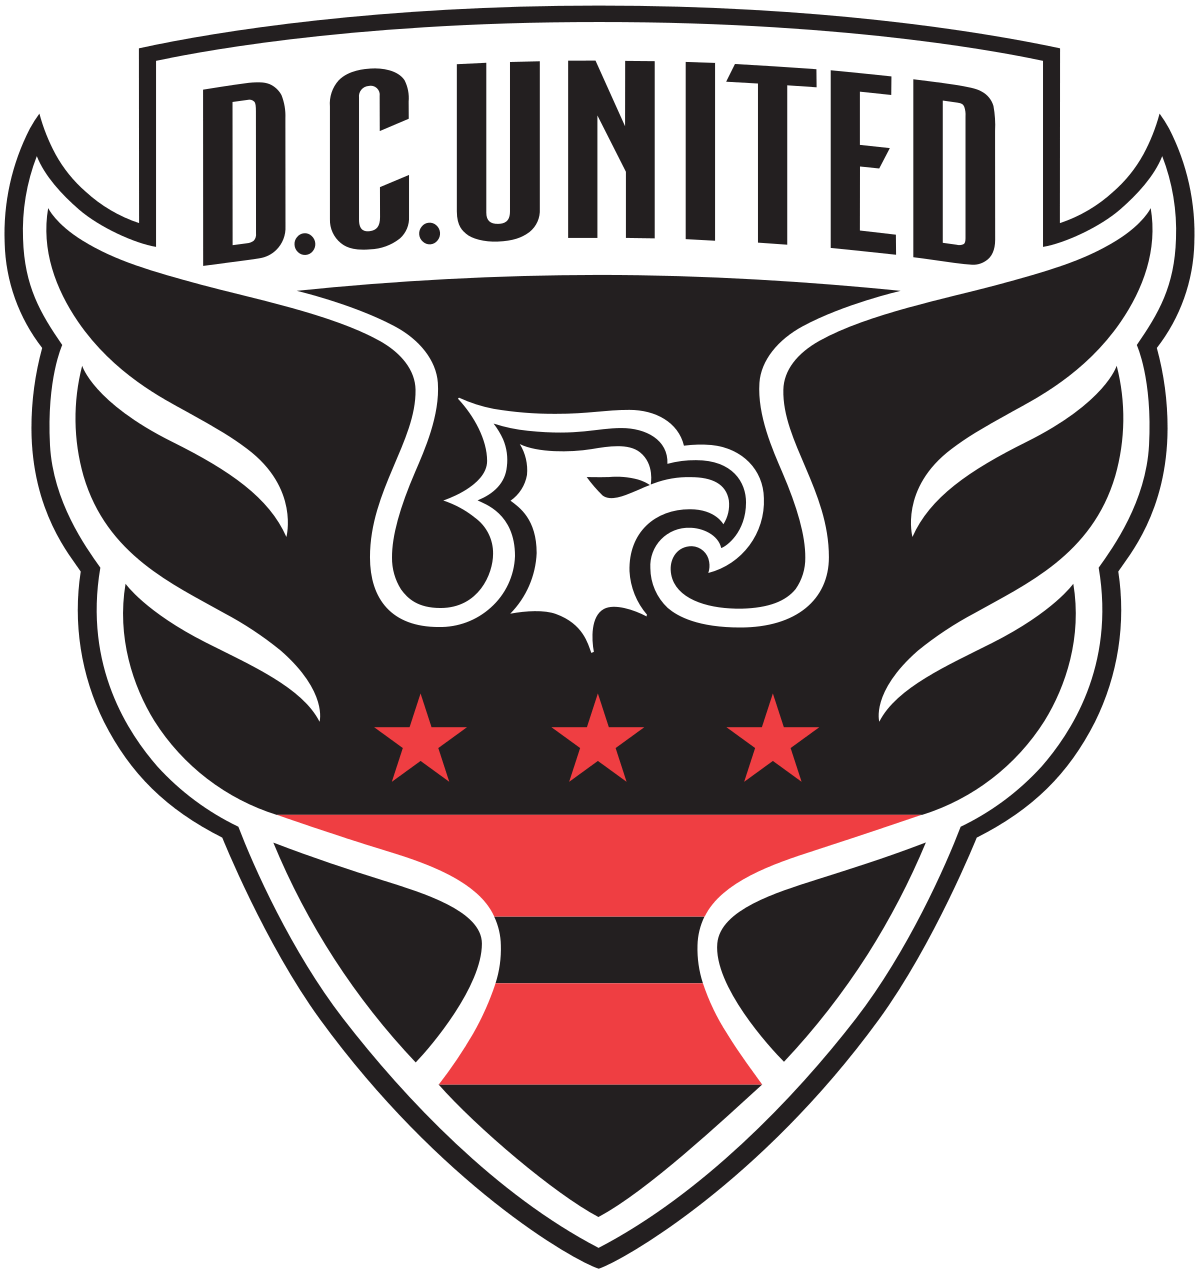 Green and Red Soccer Logo - D.C. United